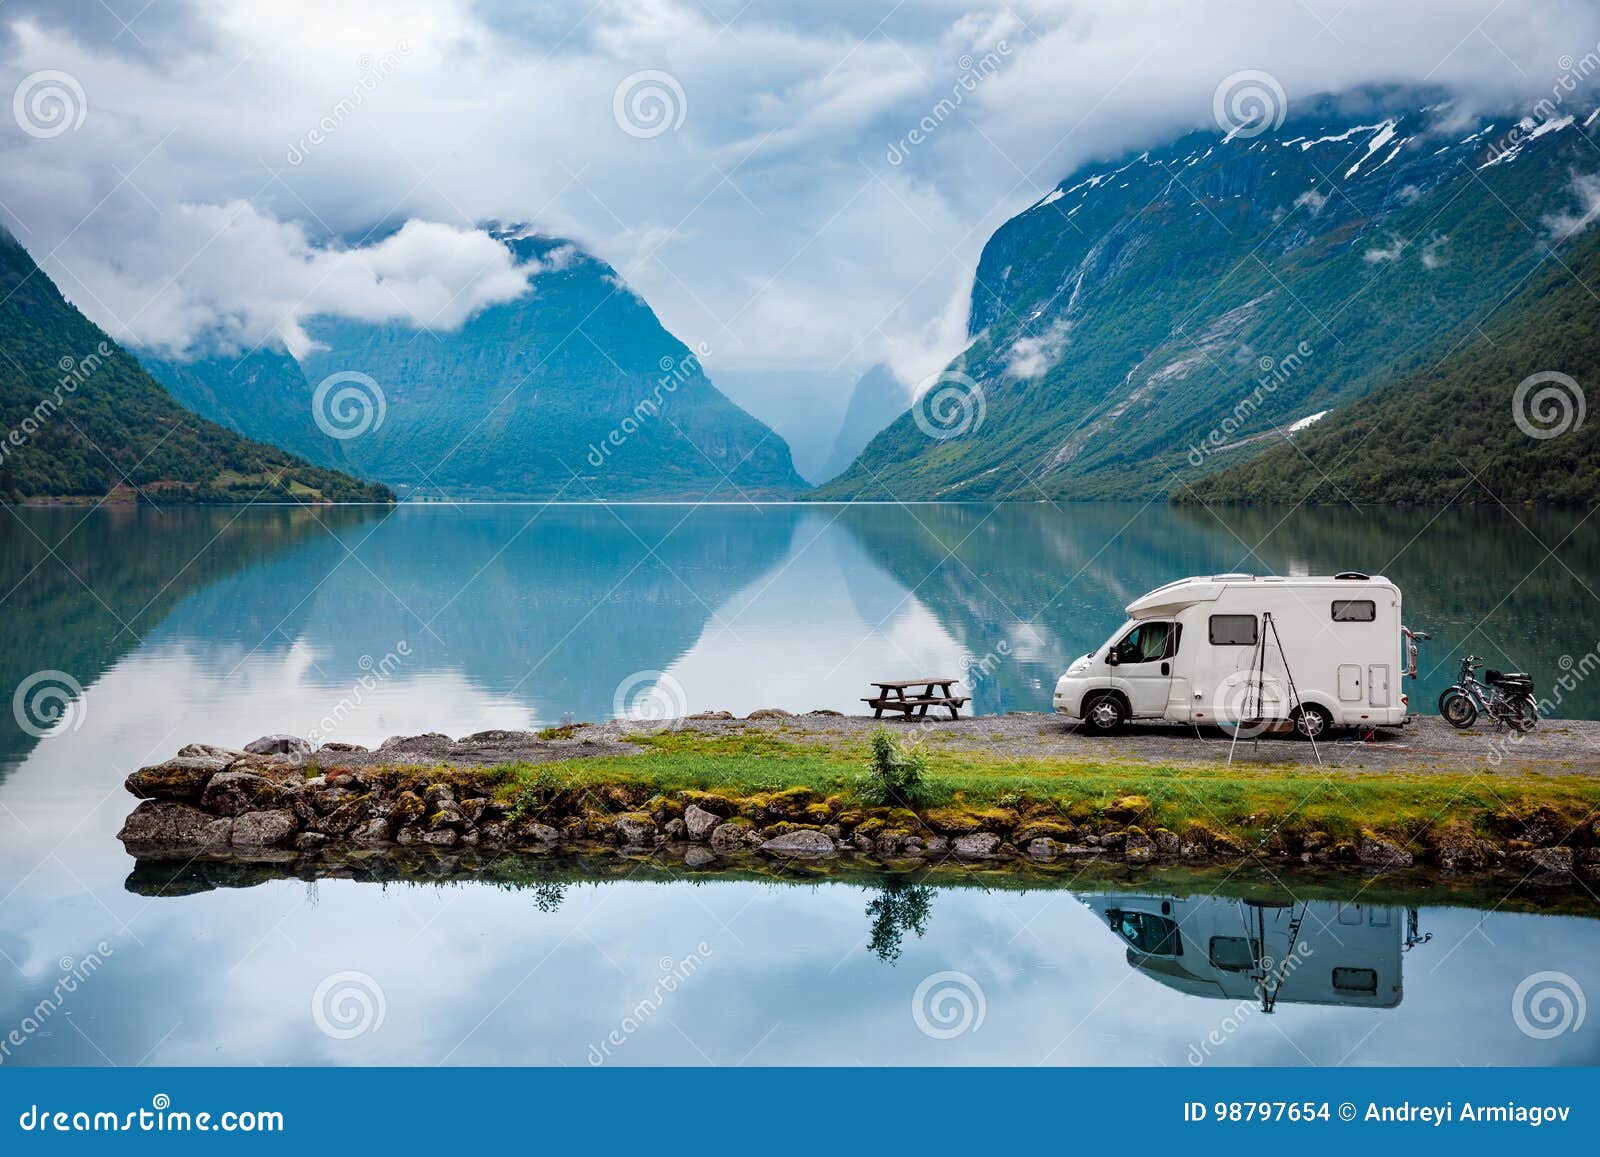 family vacation travel, holiday trip in motorhome